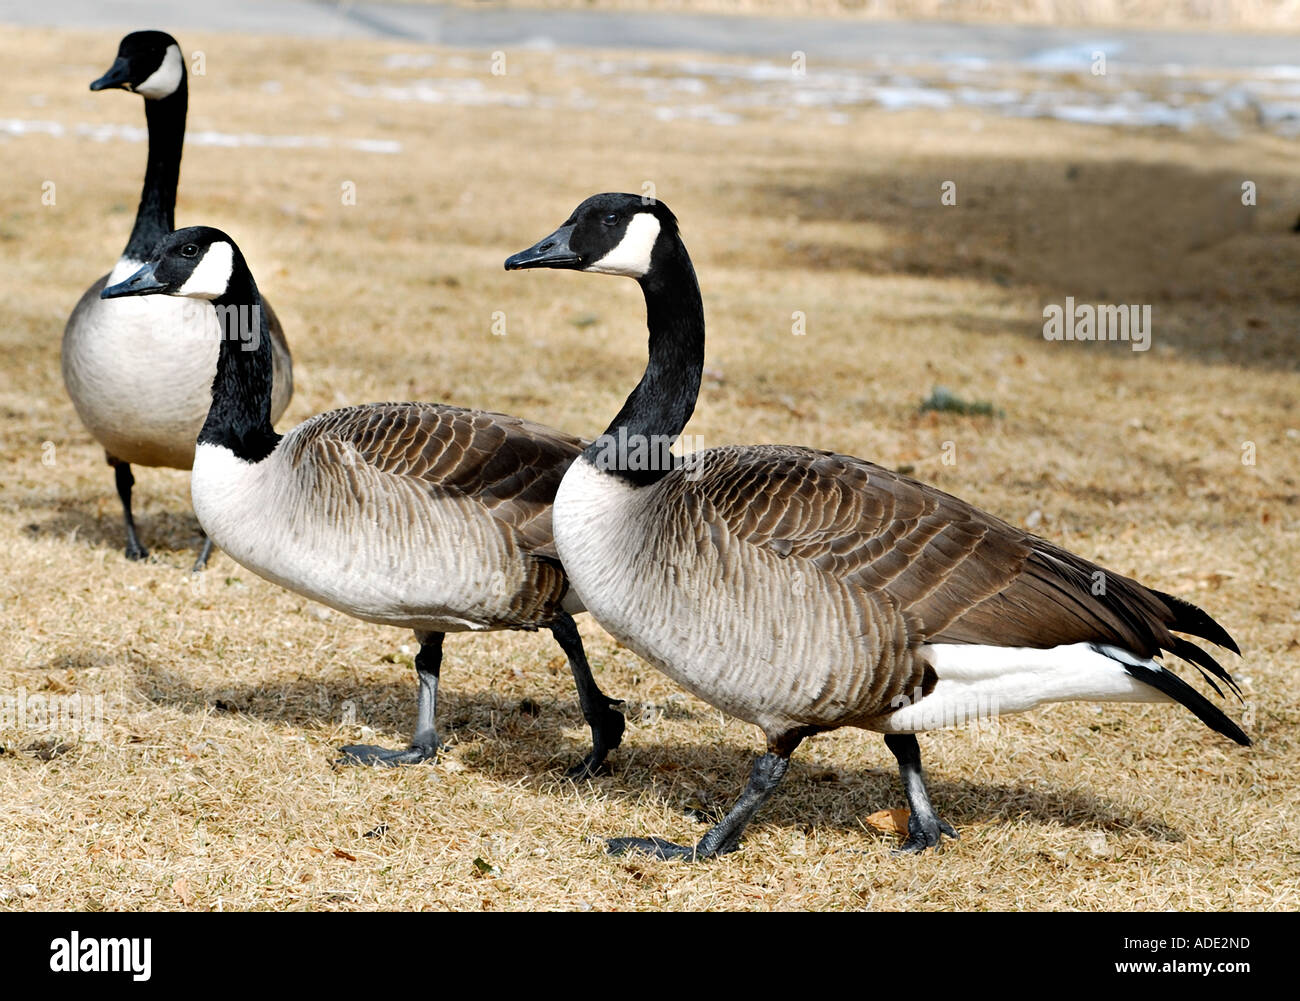 Large long-necked Canadian geese Stock Photo - Alamy